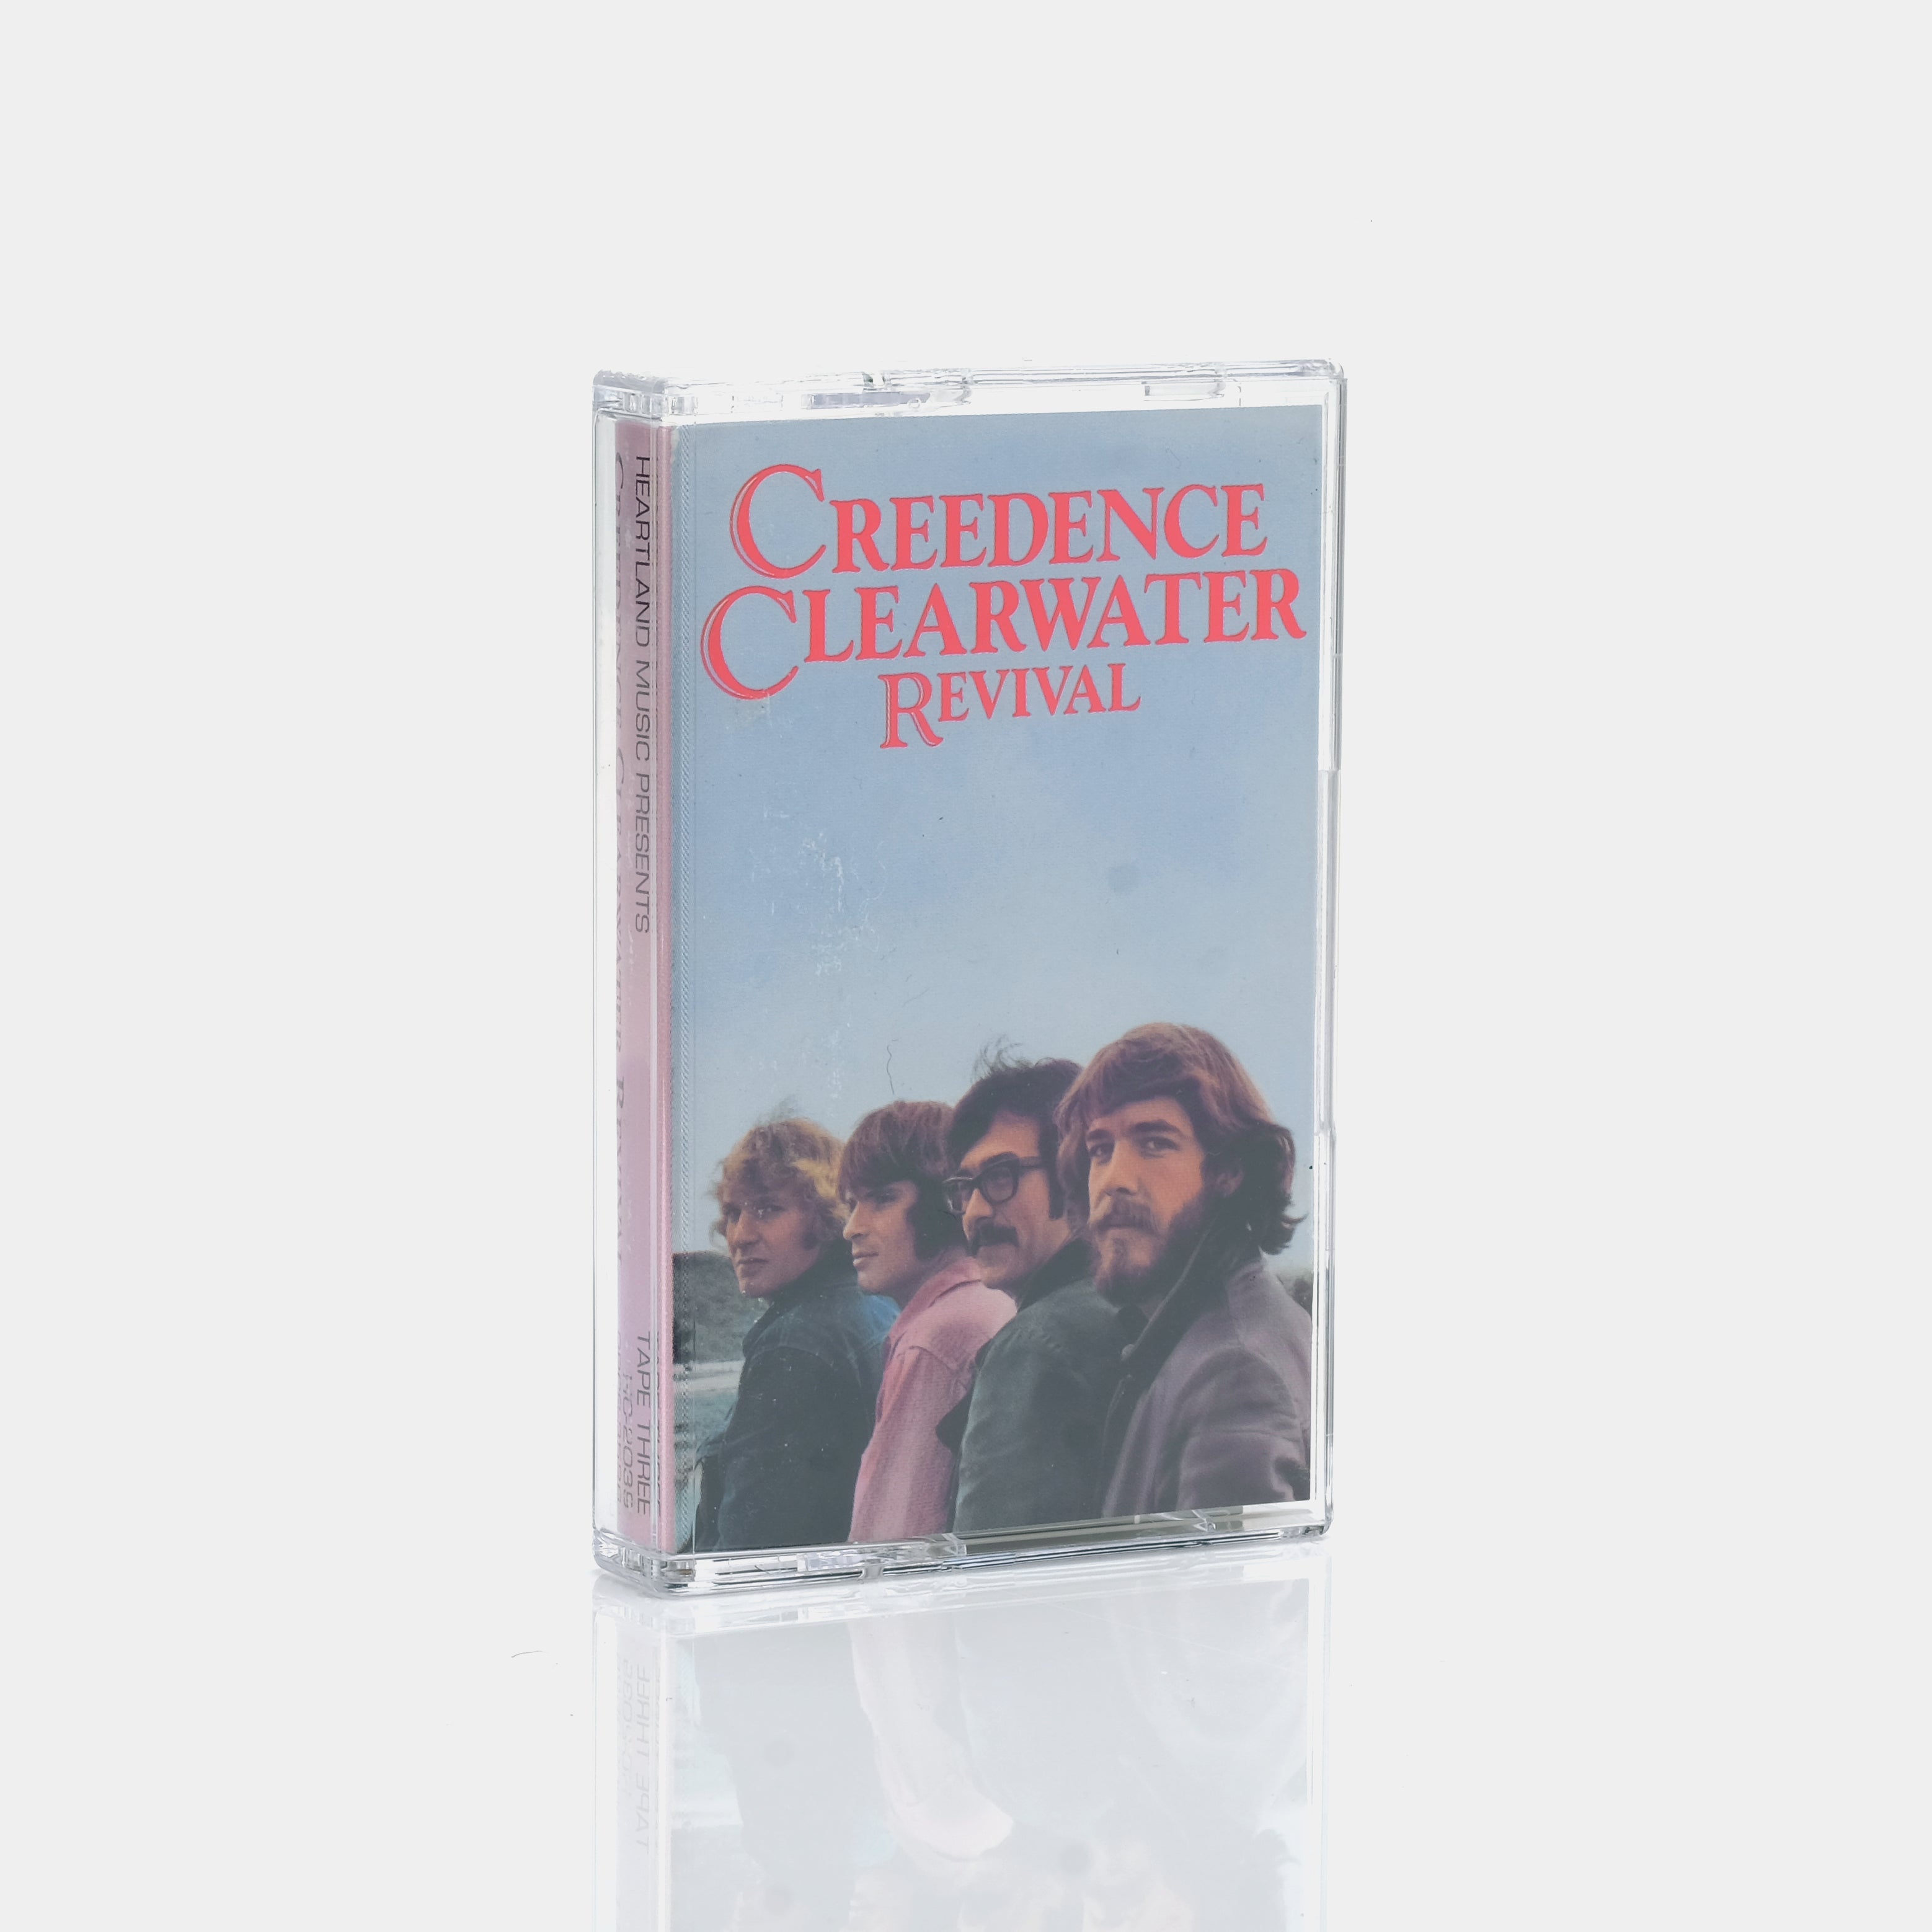 Creedence Clearwater Revival - Heartland Music Presents - Tape Three Cassette Tape